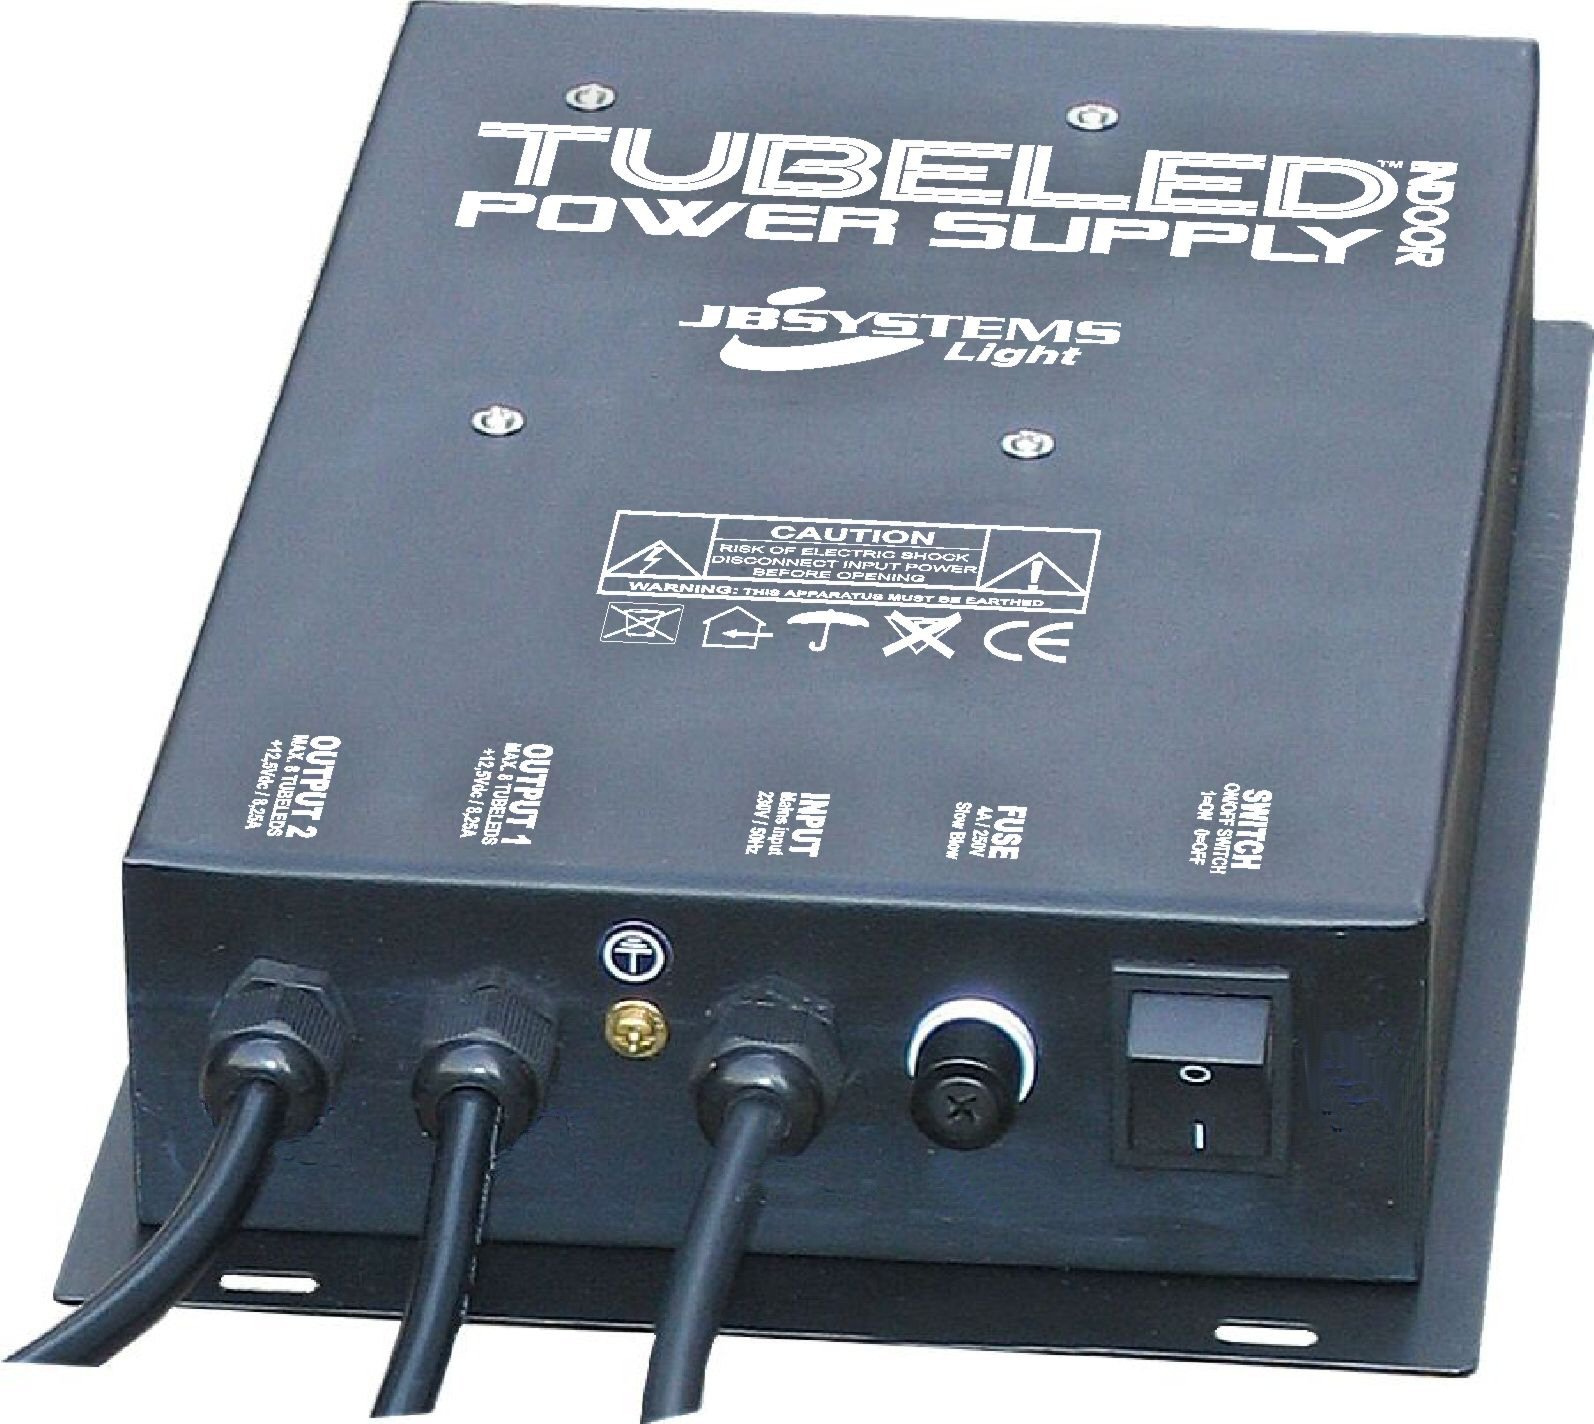 JBSYSTEMS Tubeled-Power-supply